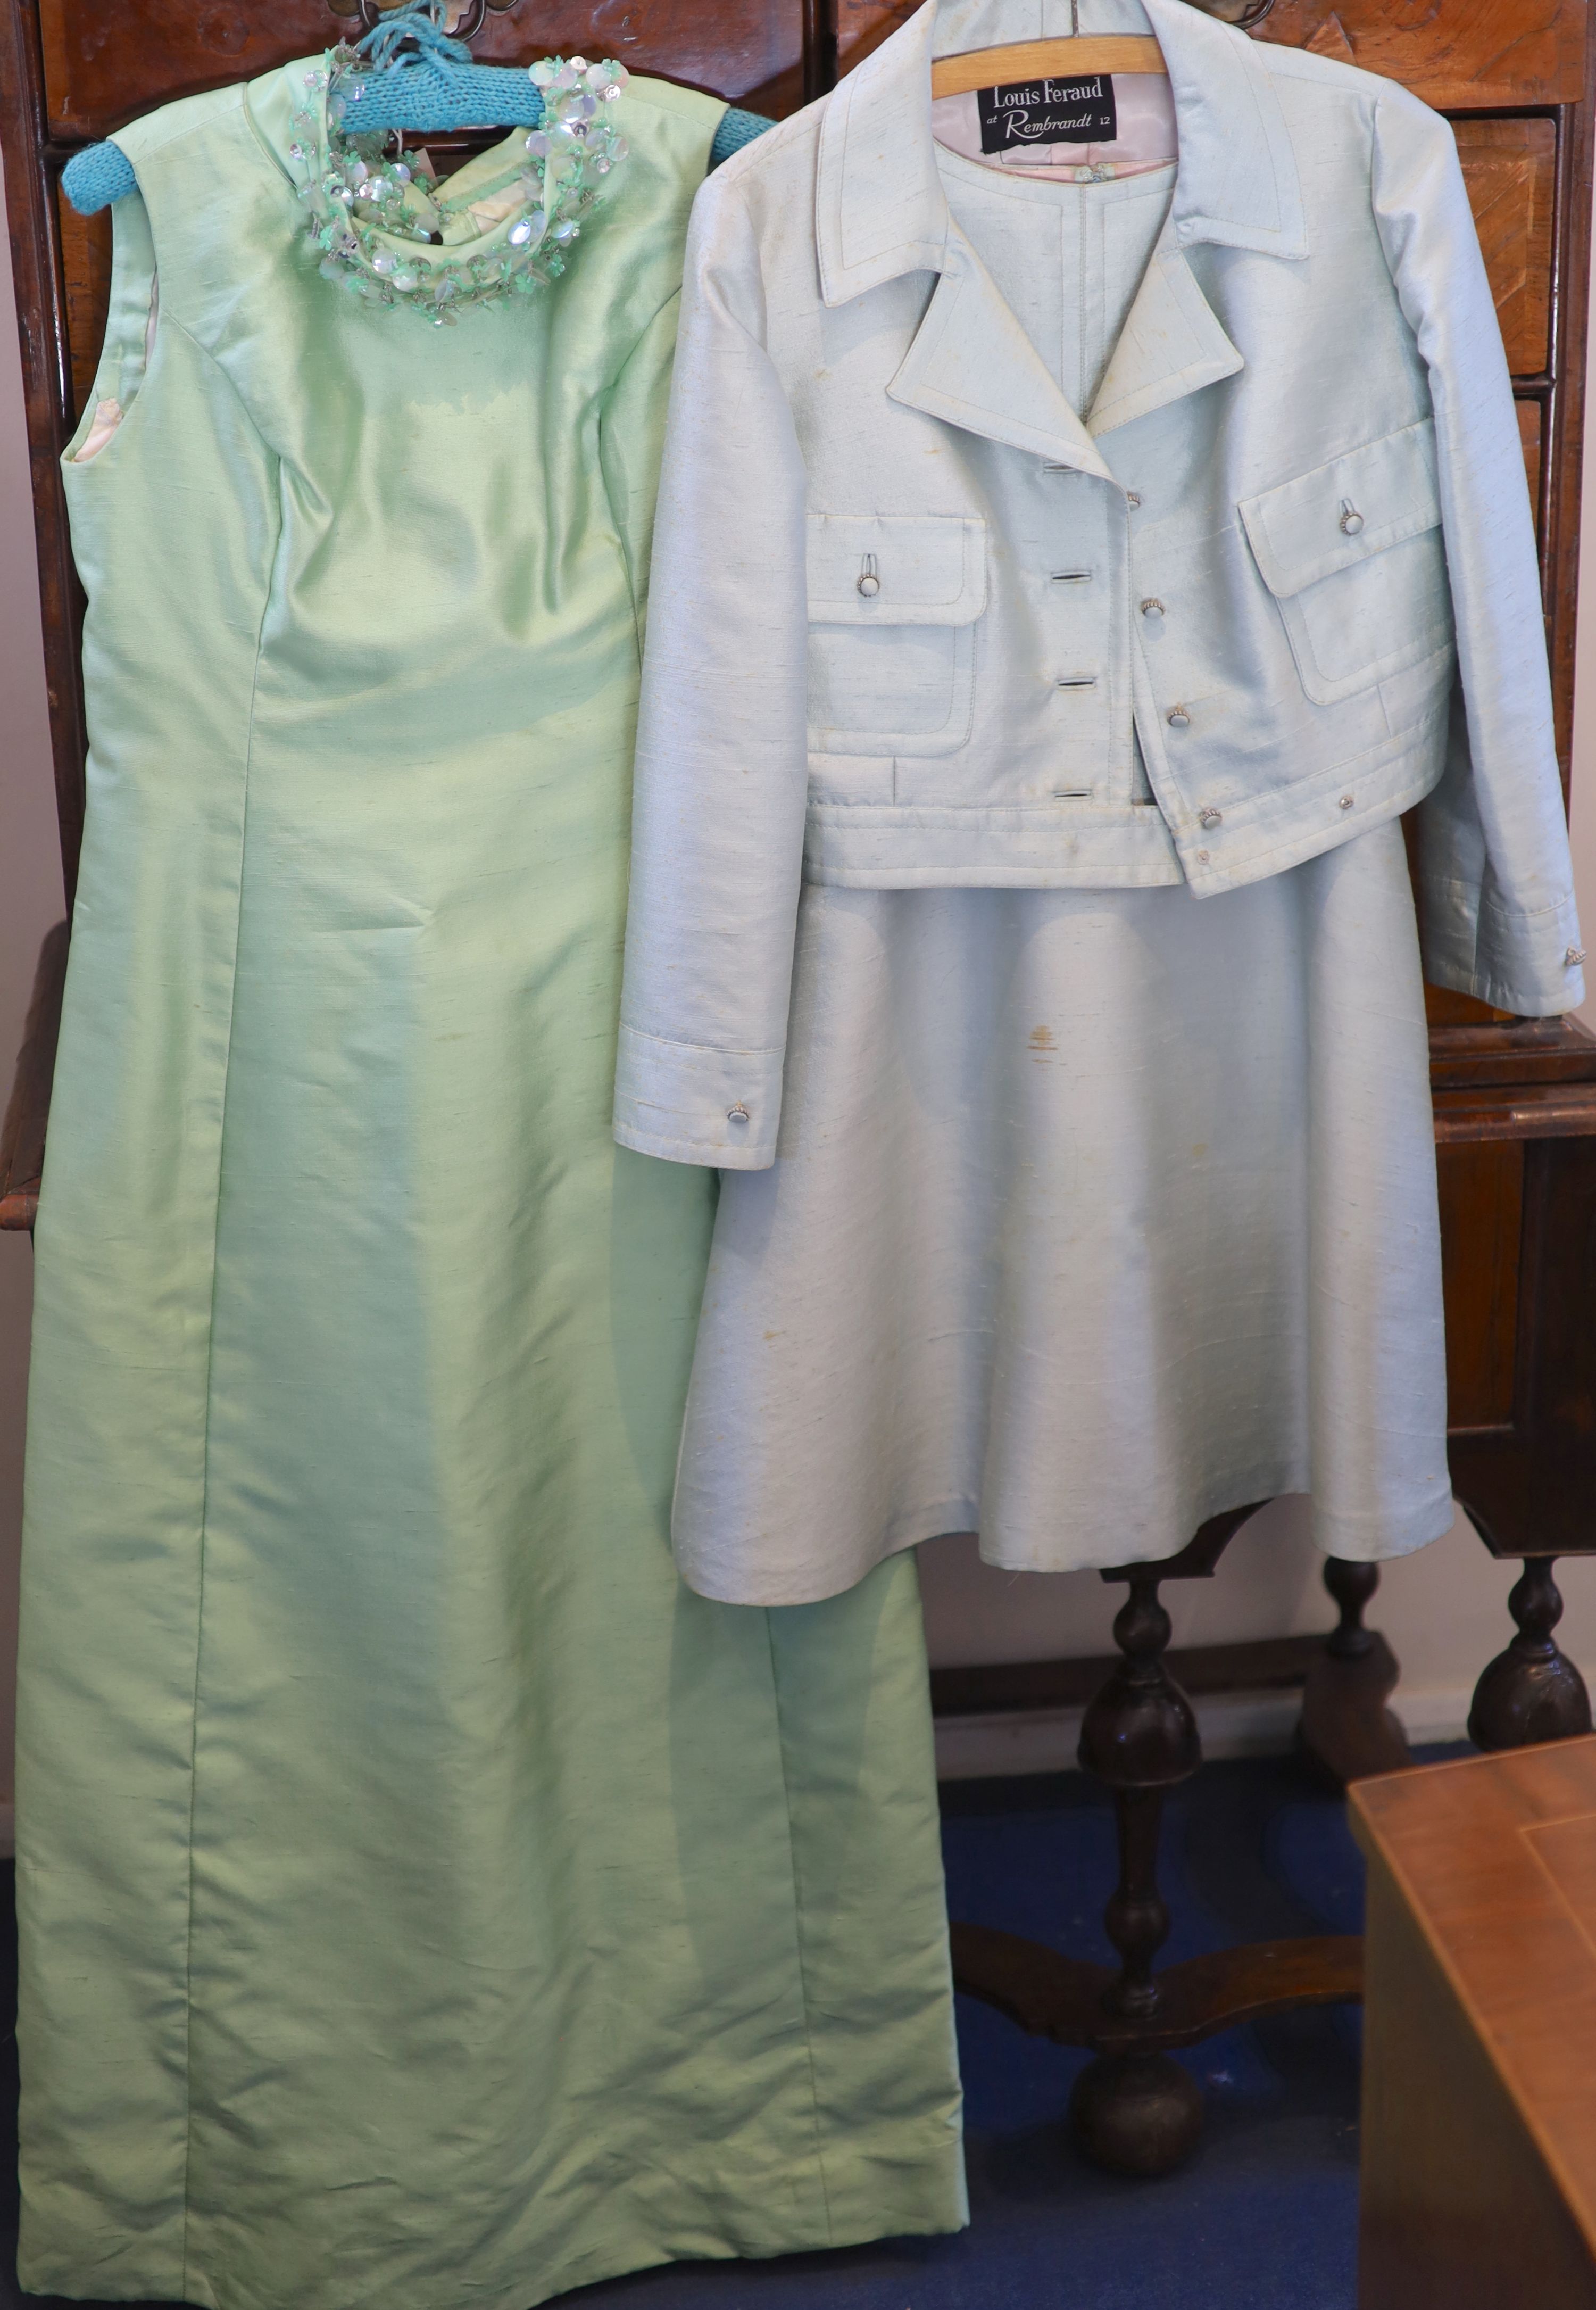 A pale green silk dress and jacket, labelled Louis Feraud,